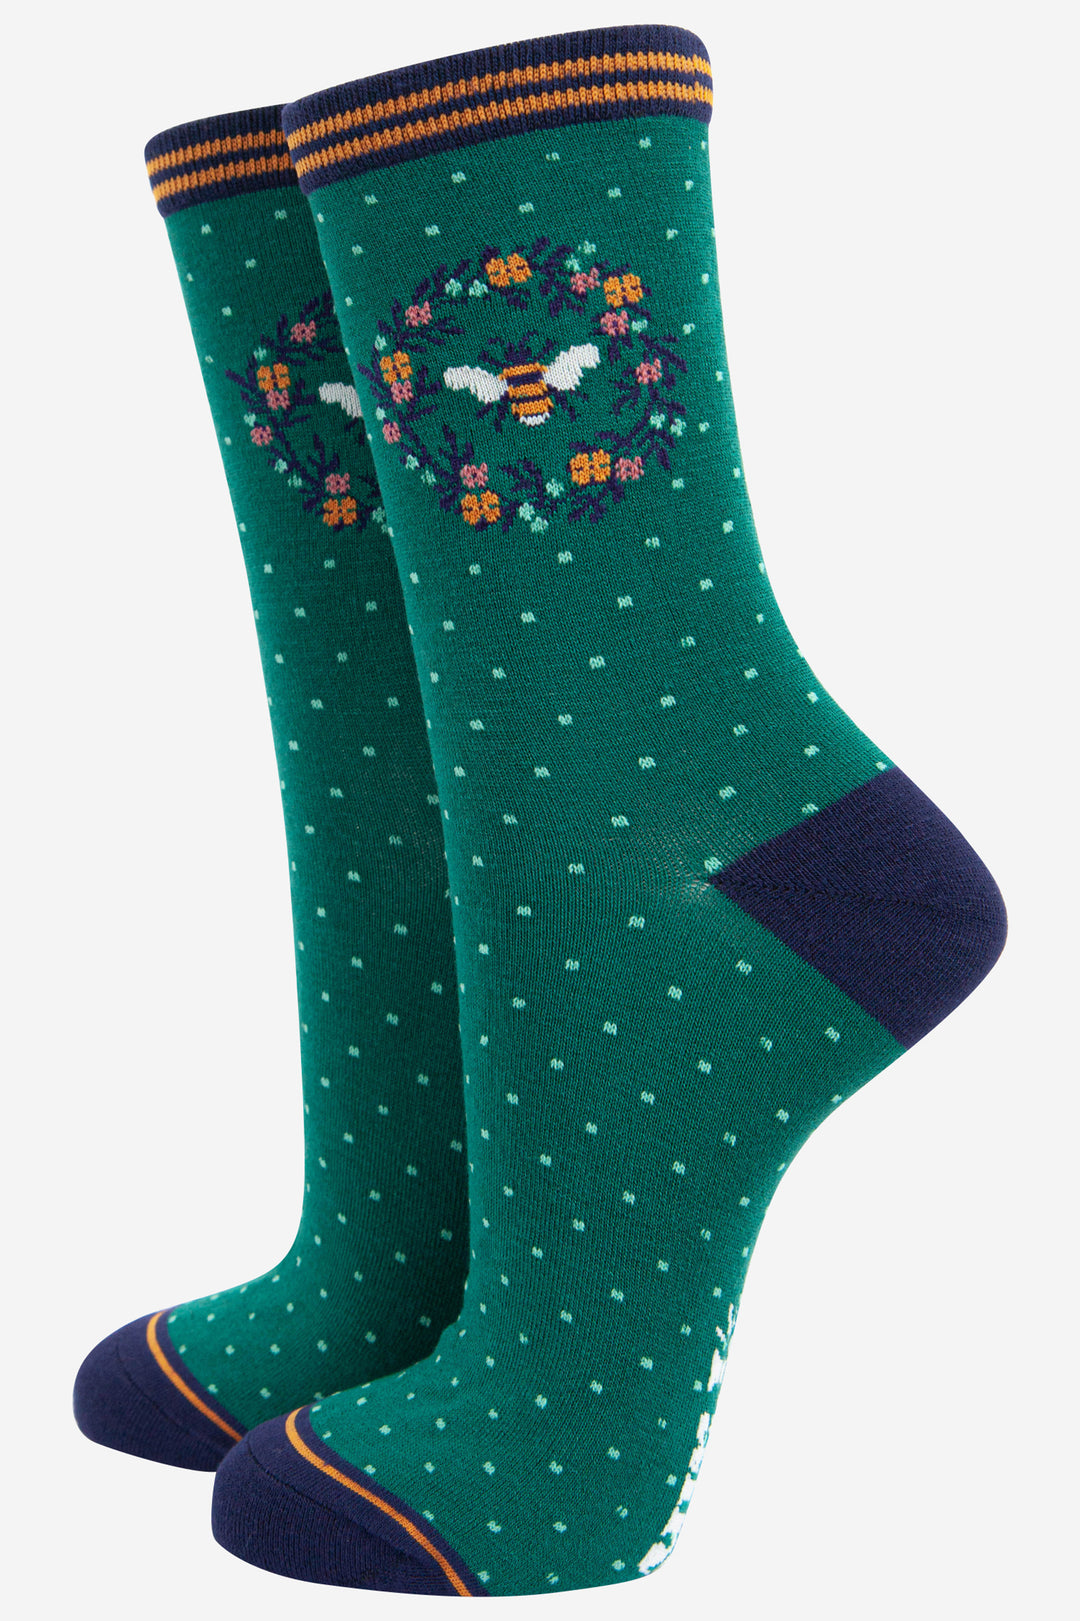 green bamboo socks featuring a large bumblebee and a floral wreath